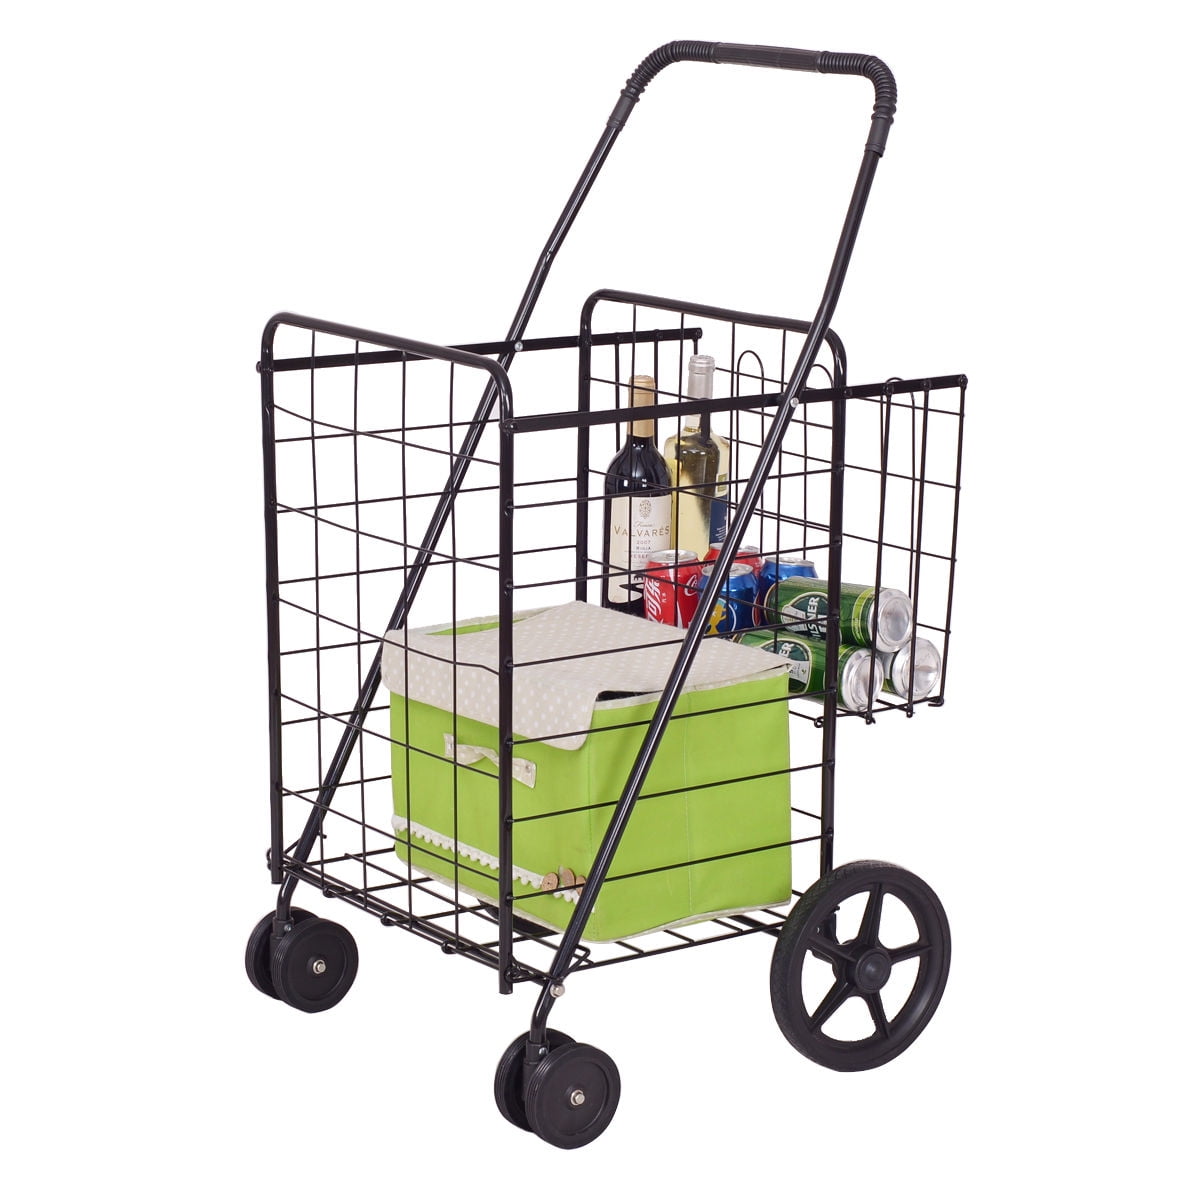 55lbs Portable Foldable Shopping Cart Trolley 2-Wheel Rolling Collapsible Basket 